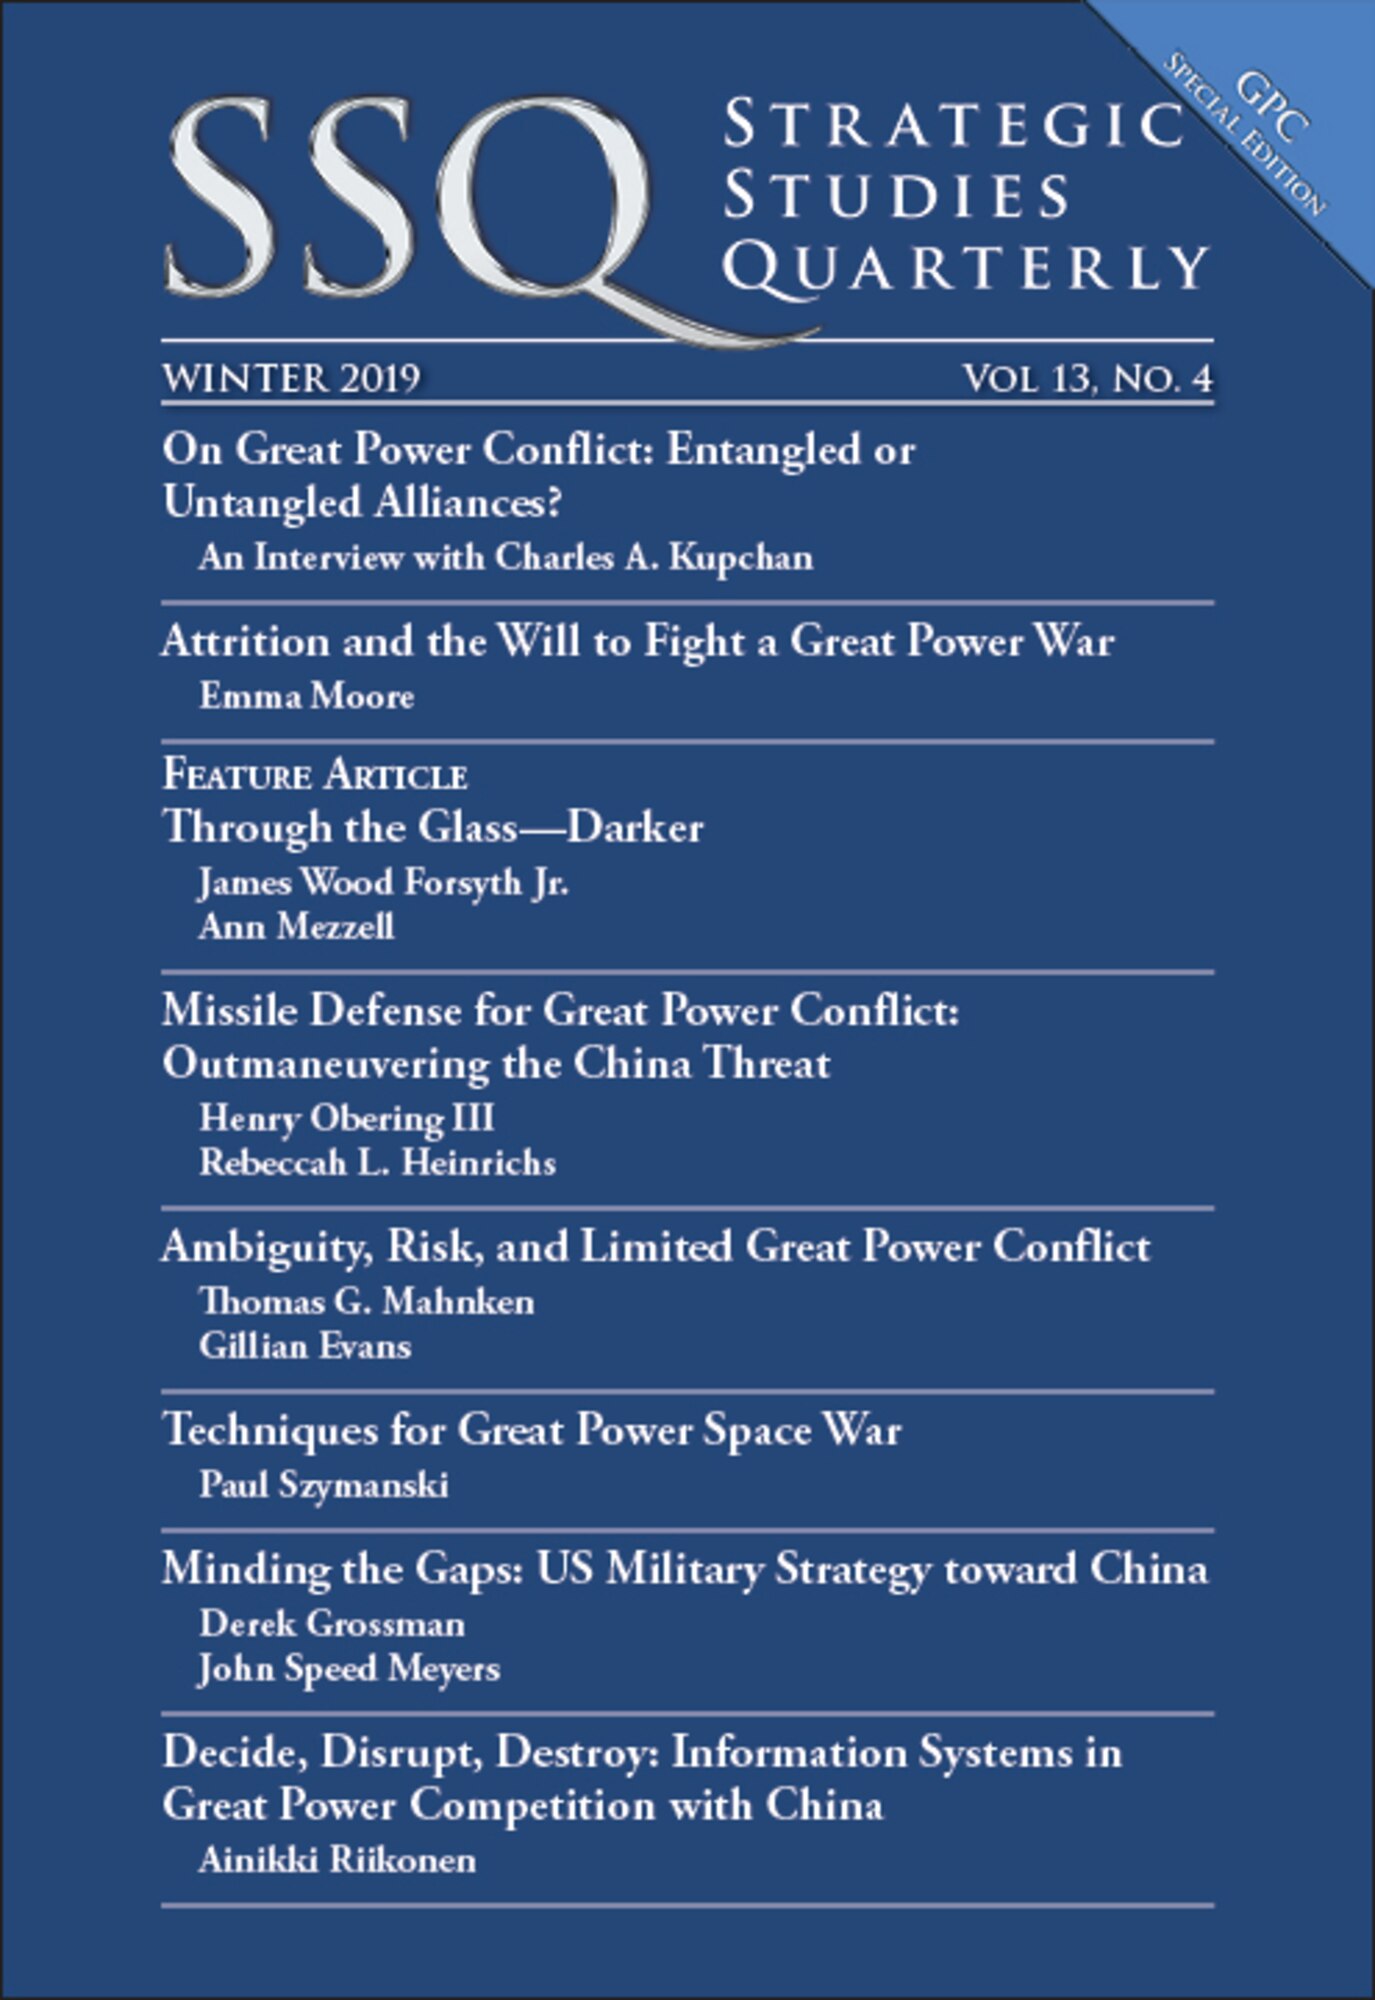 Air University Press has released the Winter 2019 Great Power Conflict Special Edition of Strategic Studies Quarterly. The edition is available at www.airuniversity.af.edu/SSQ.